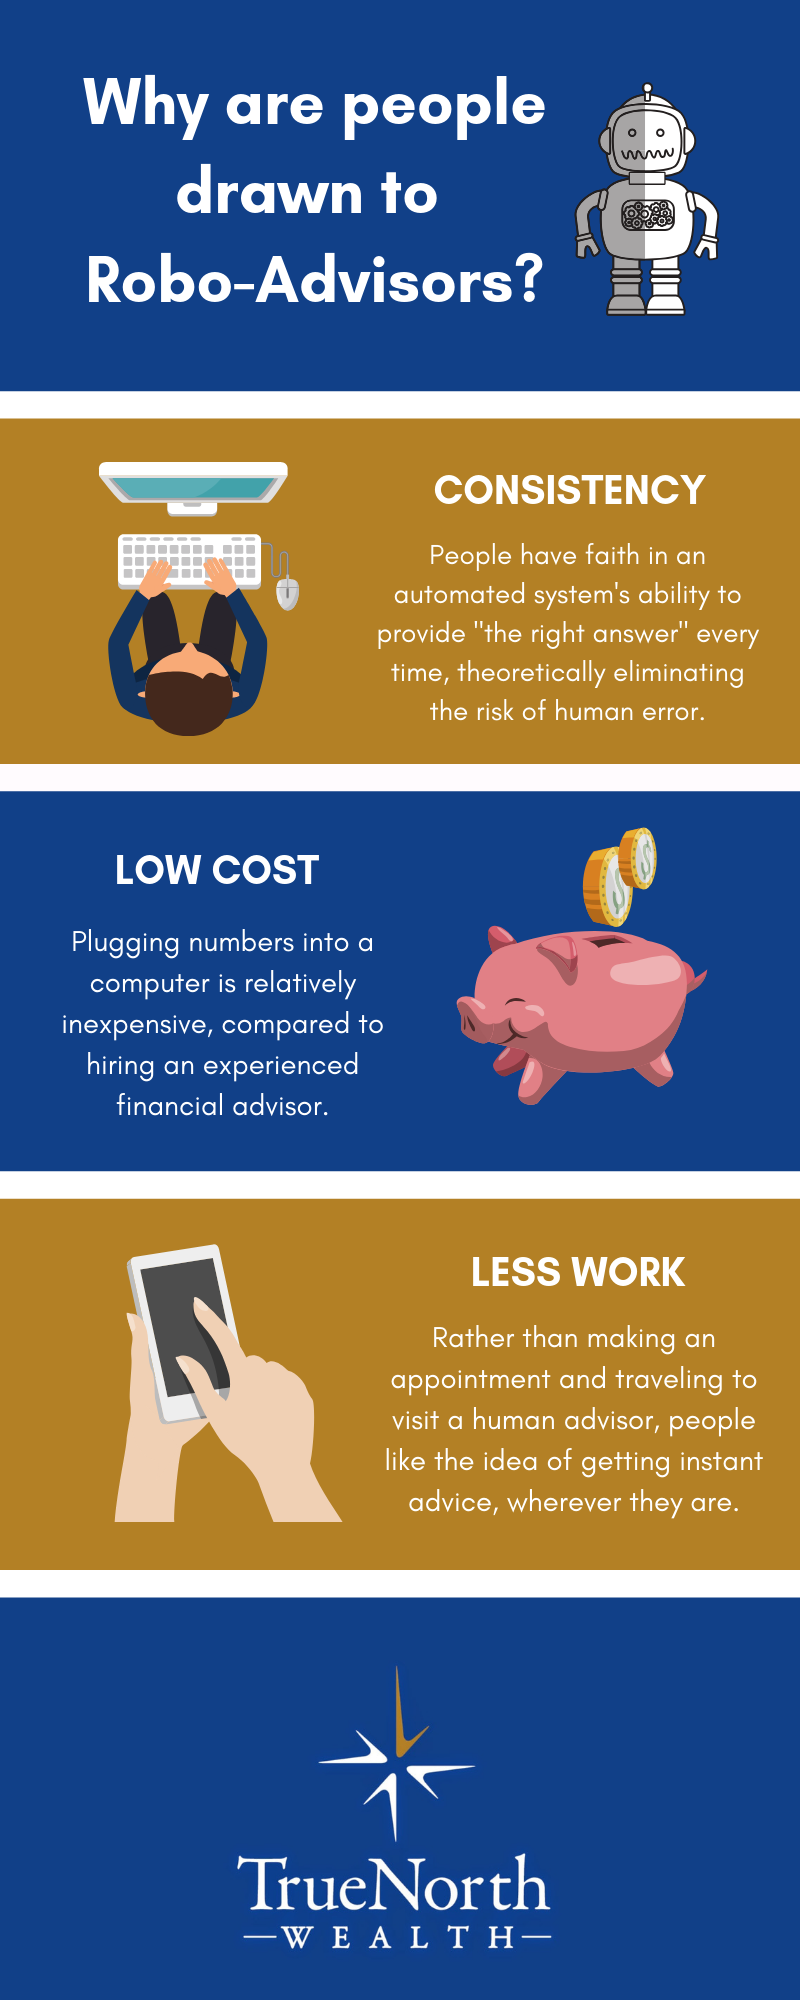 True North Wealth 2019 Infographic.png